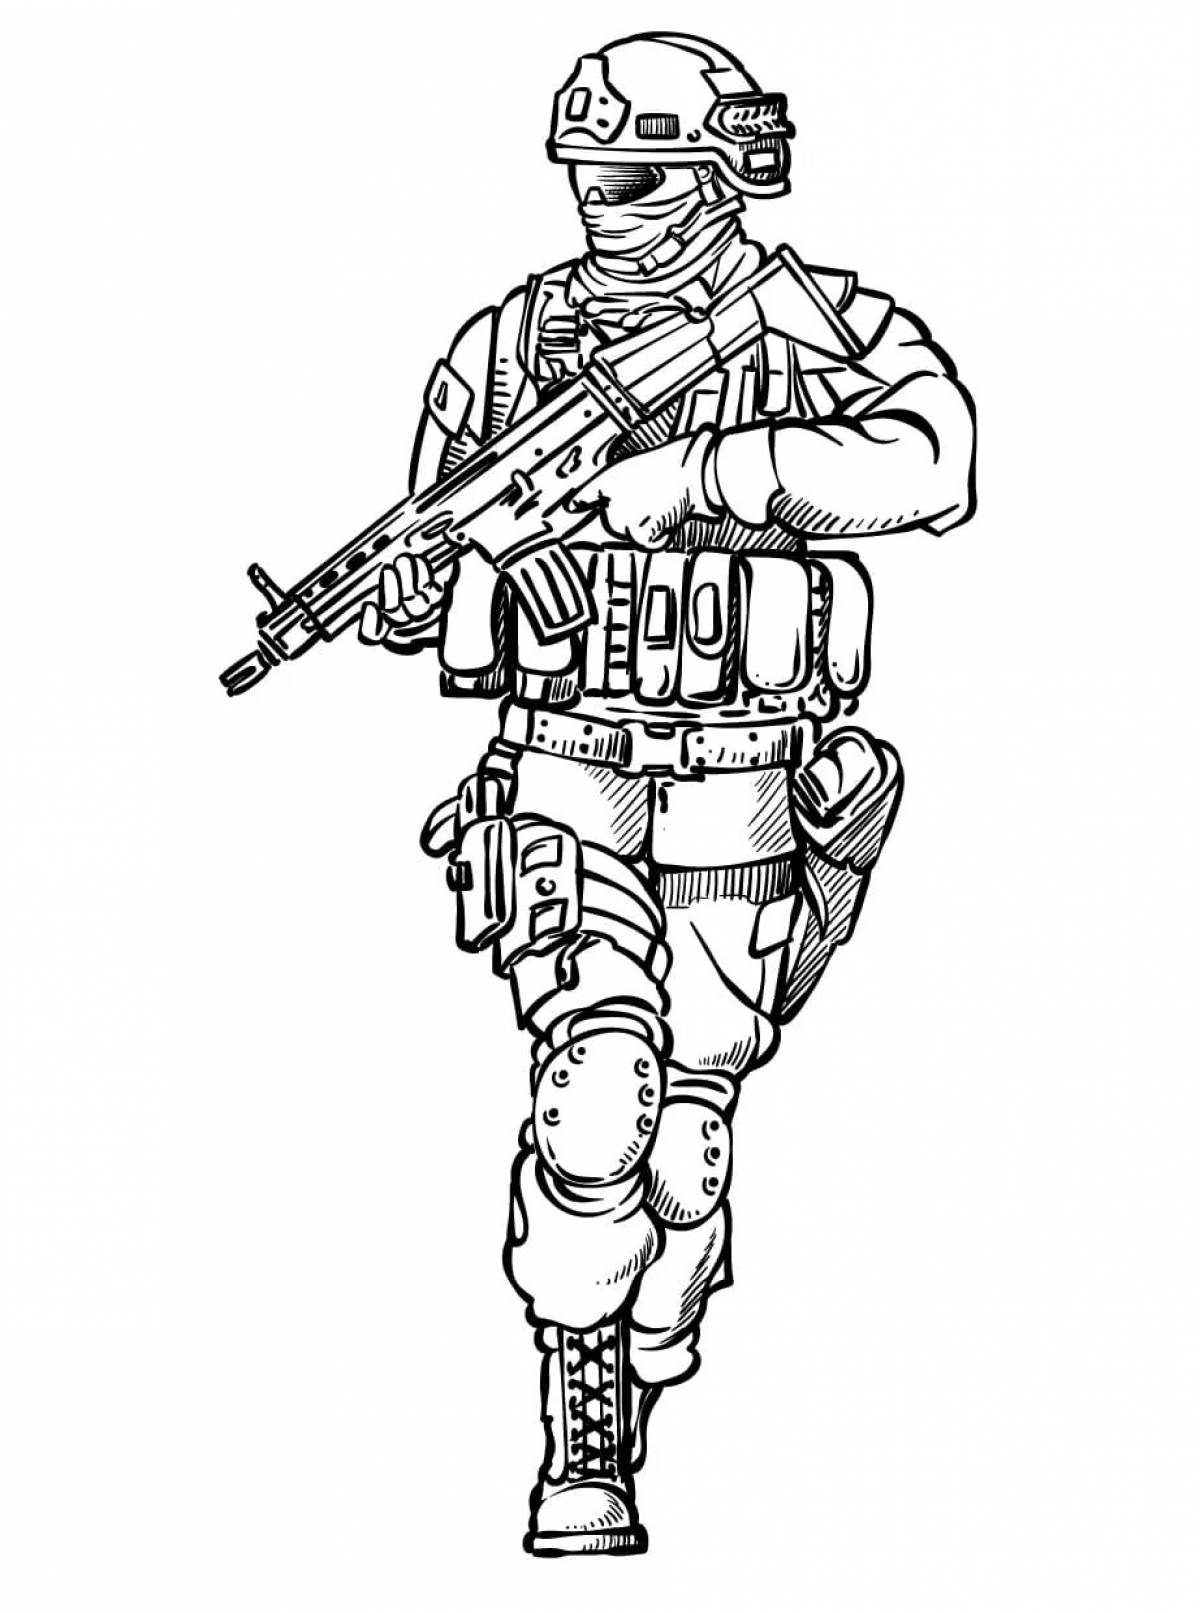 Coloring page famous soldiers of the Russian army